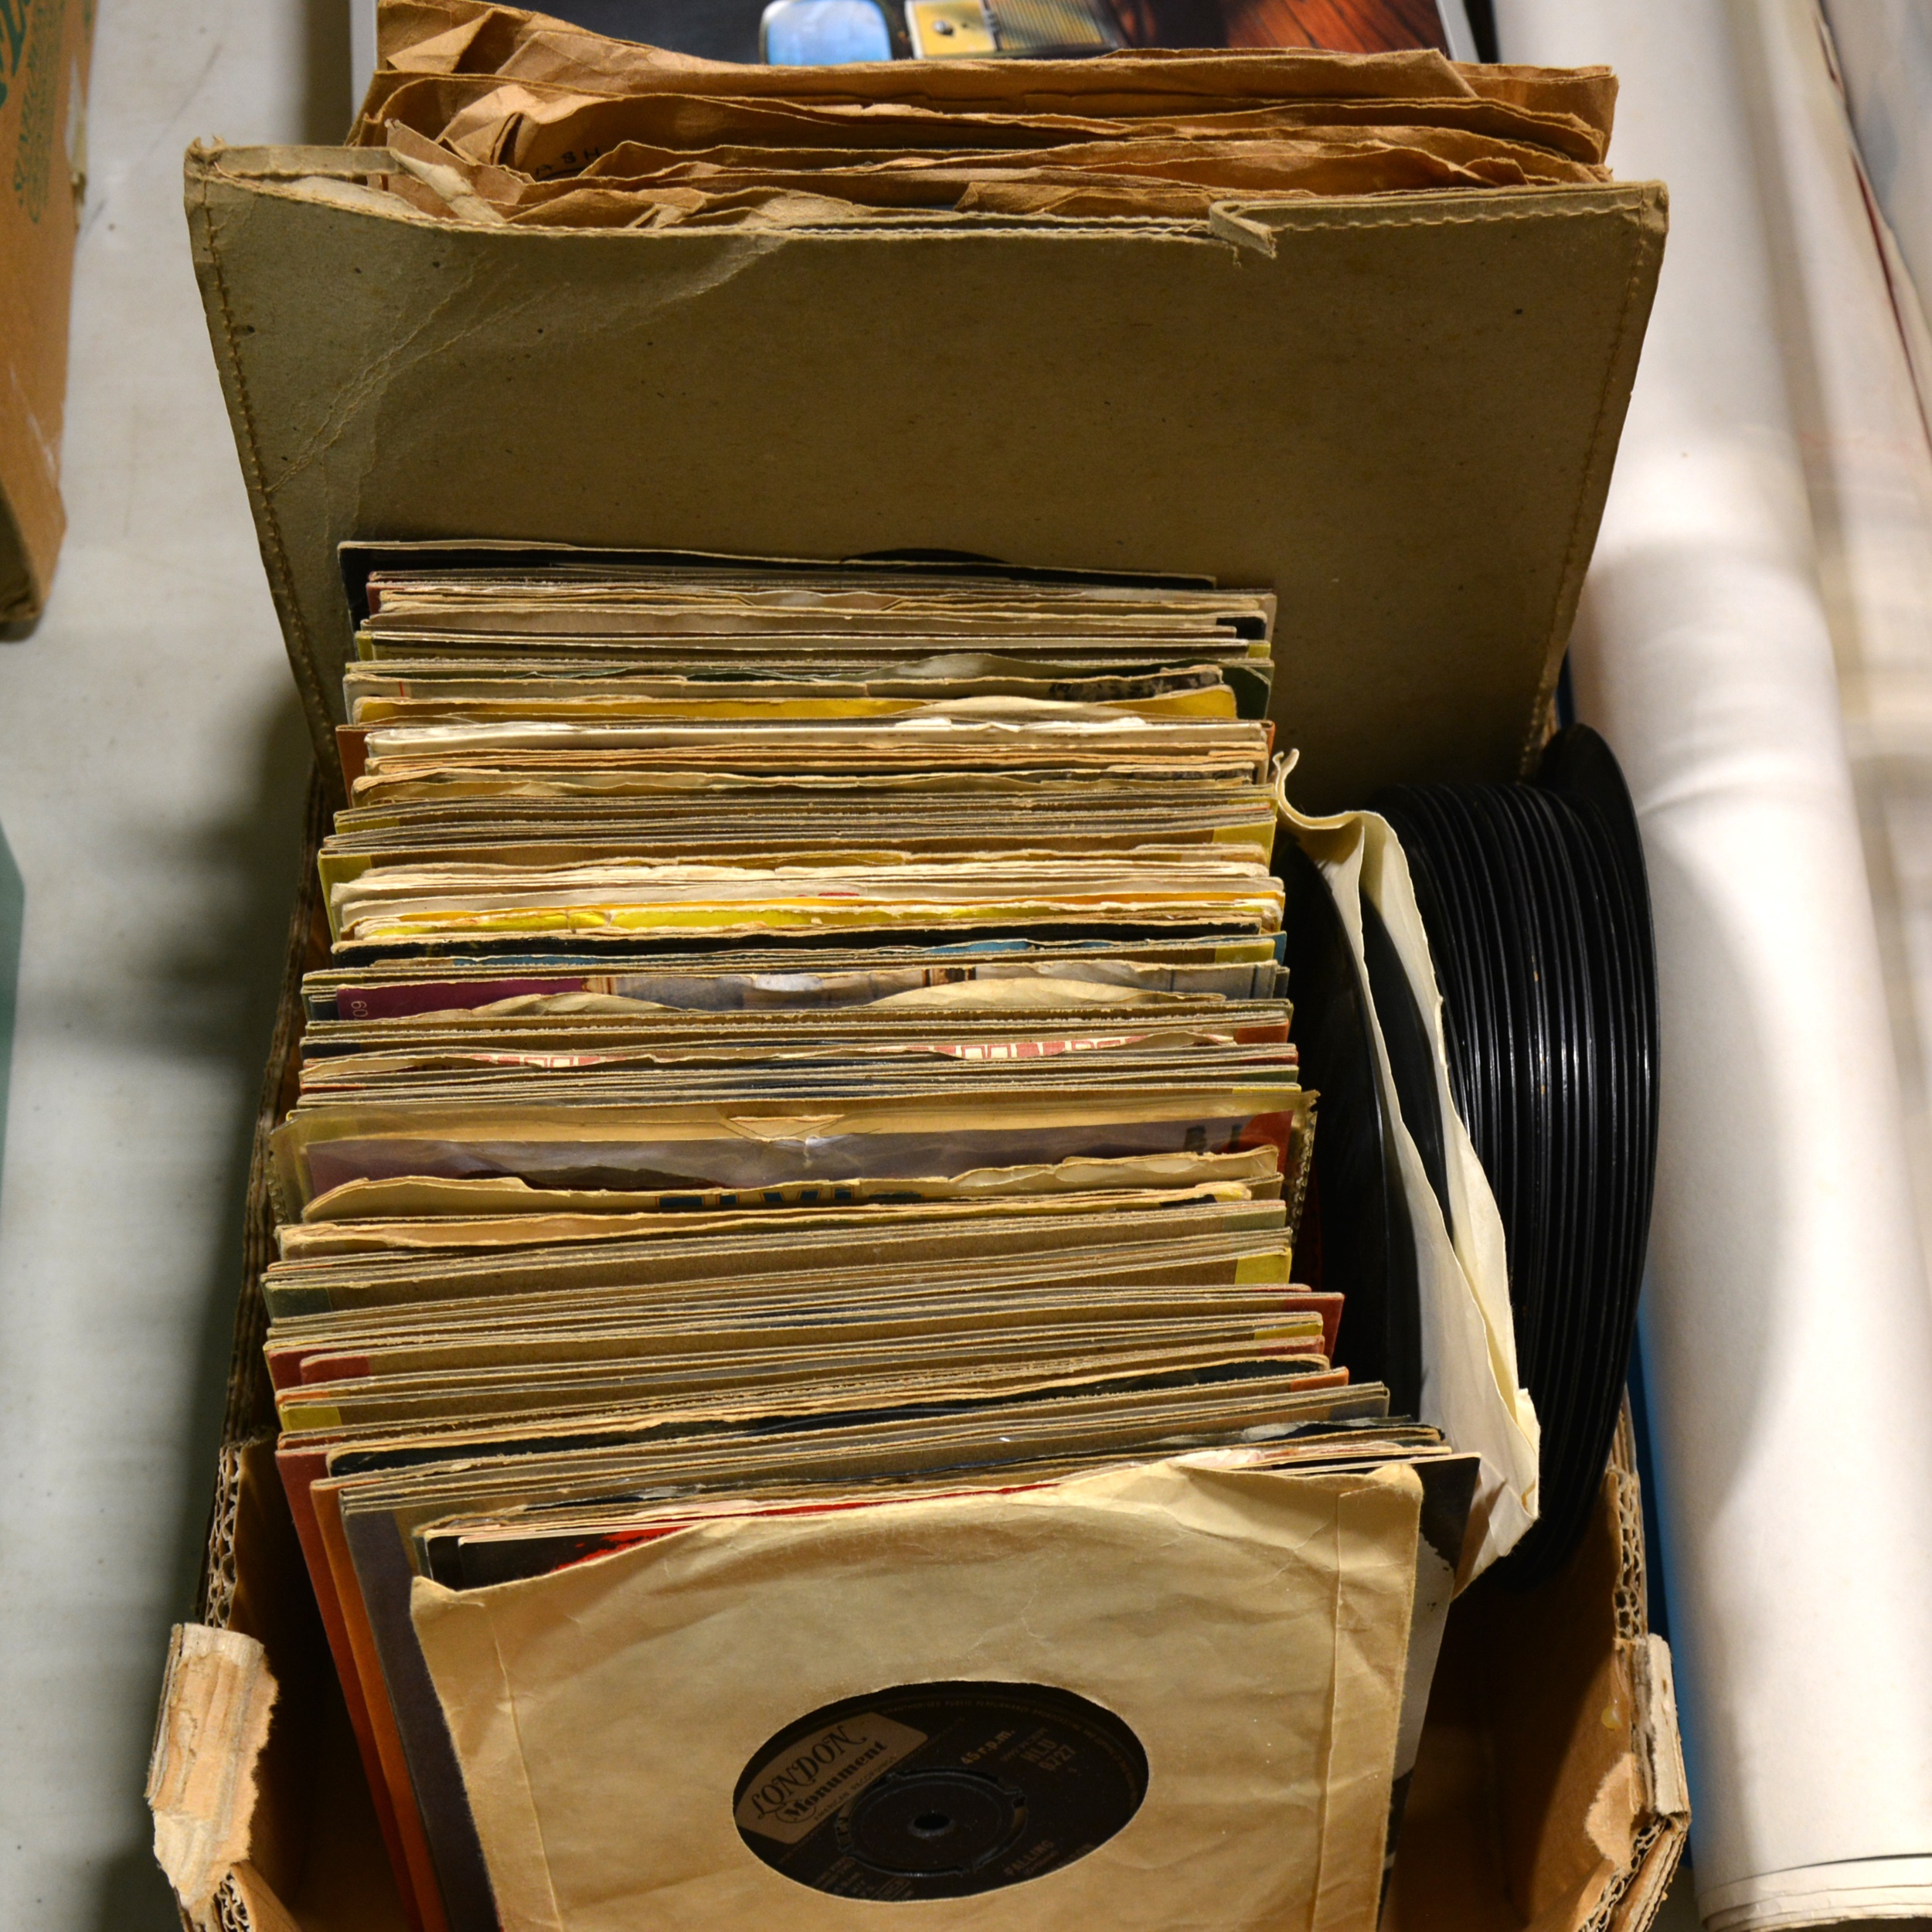 Aprox 120+ 7" singles and 78s vinyl records; including The Beatles, Billy Fury, The Hollies, - Image 2 of 2